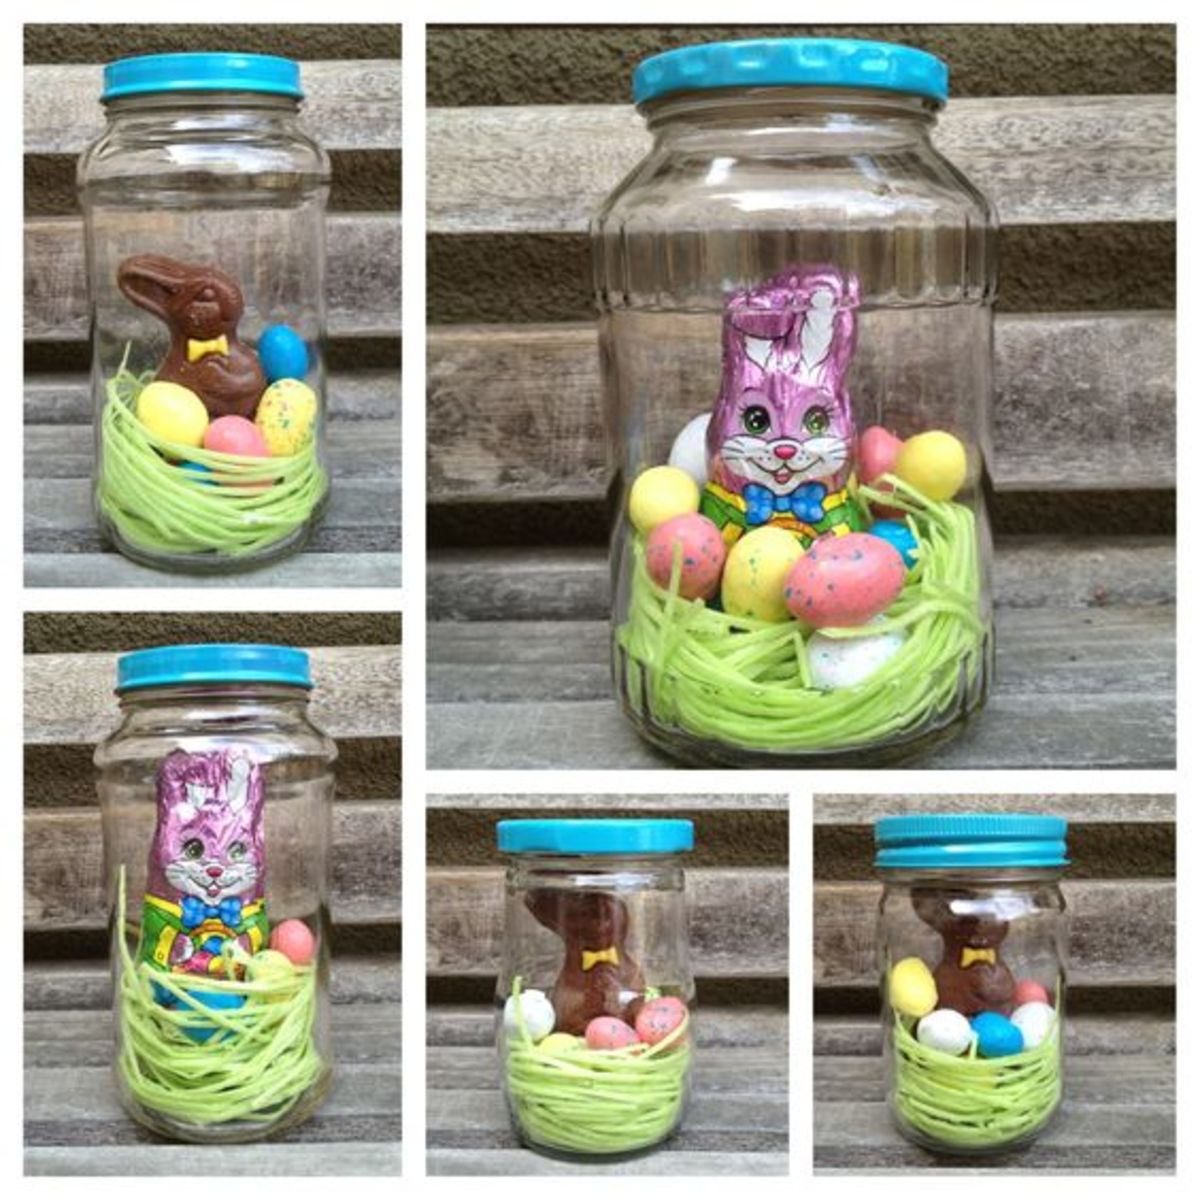 easter-crafts-for-kids-to-make